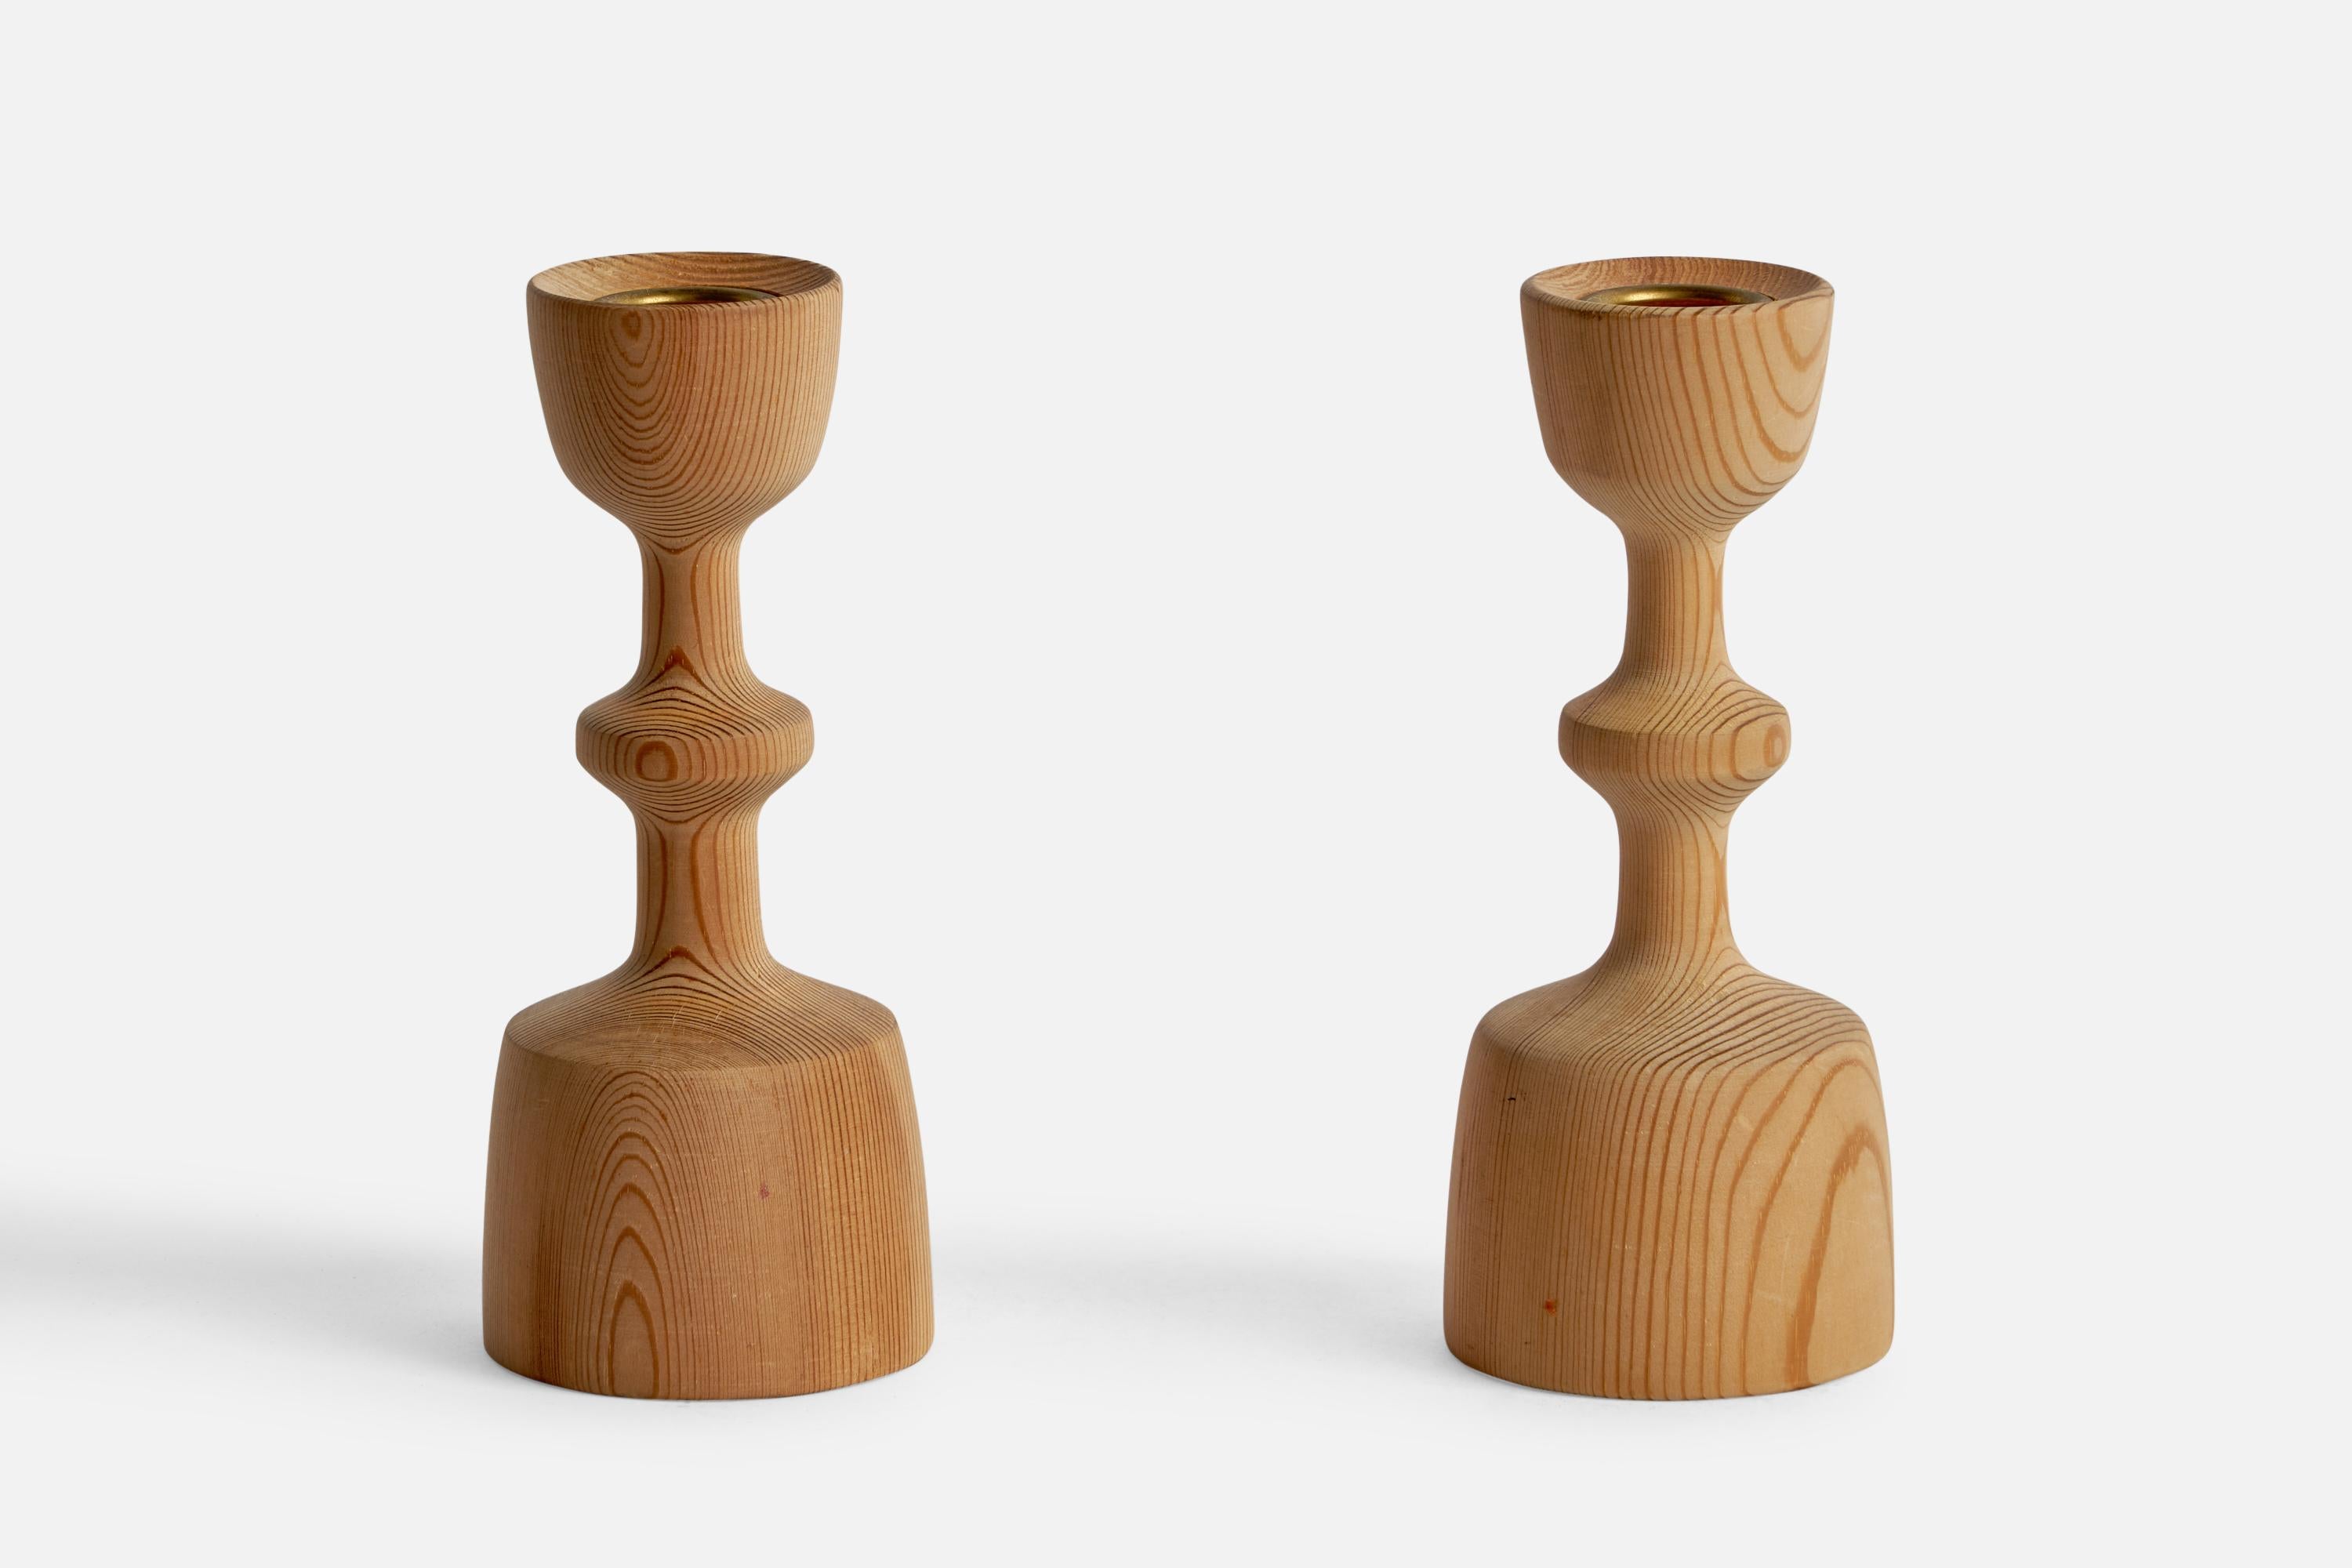 A pair of pine candlesticks designed and produced in Sweden, 1970s.

Holds 0.85” diameter candles